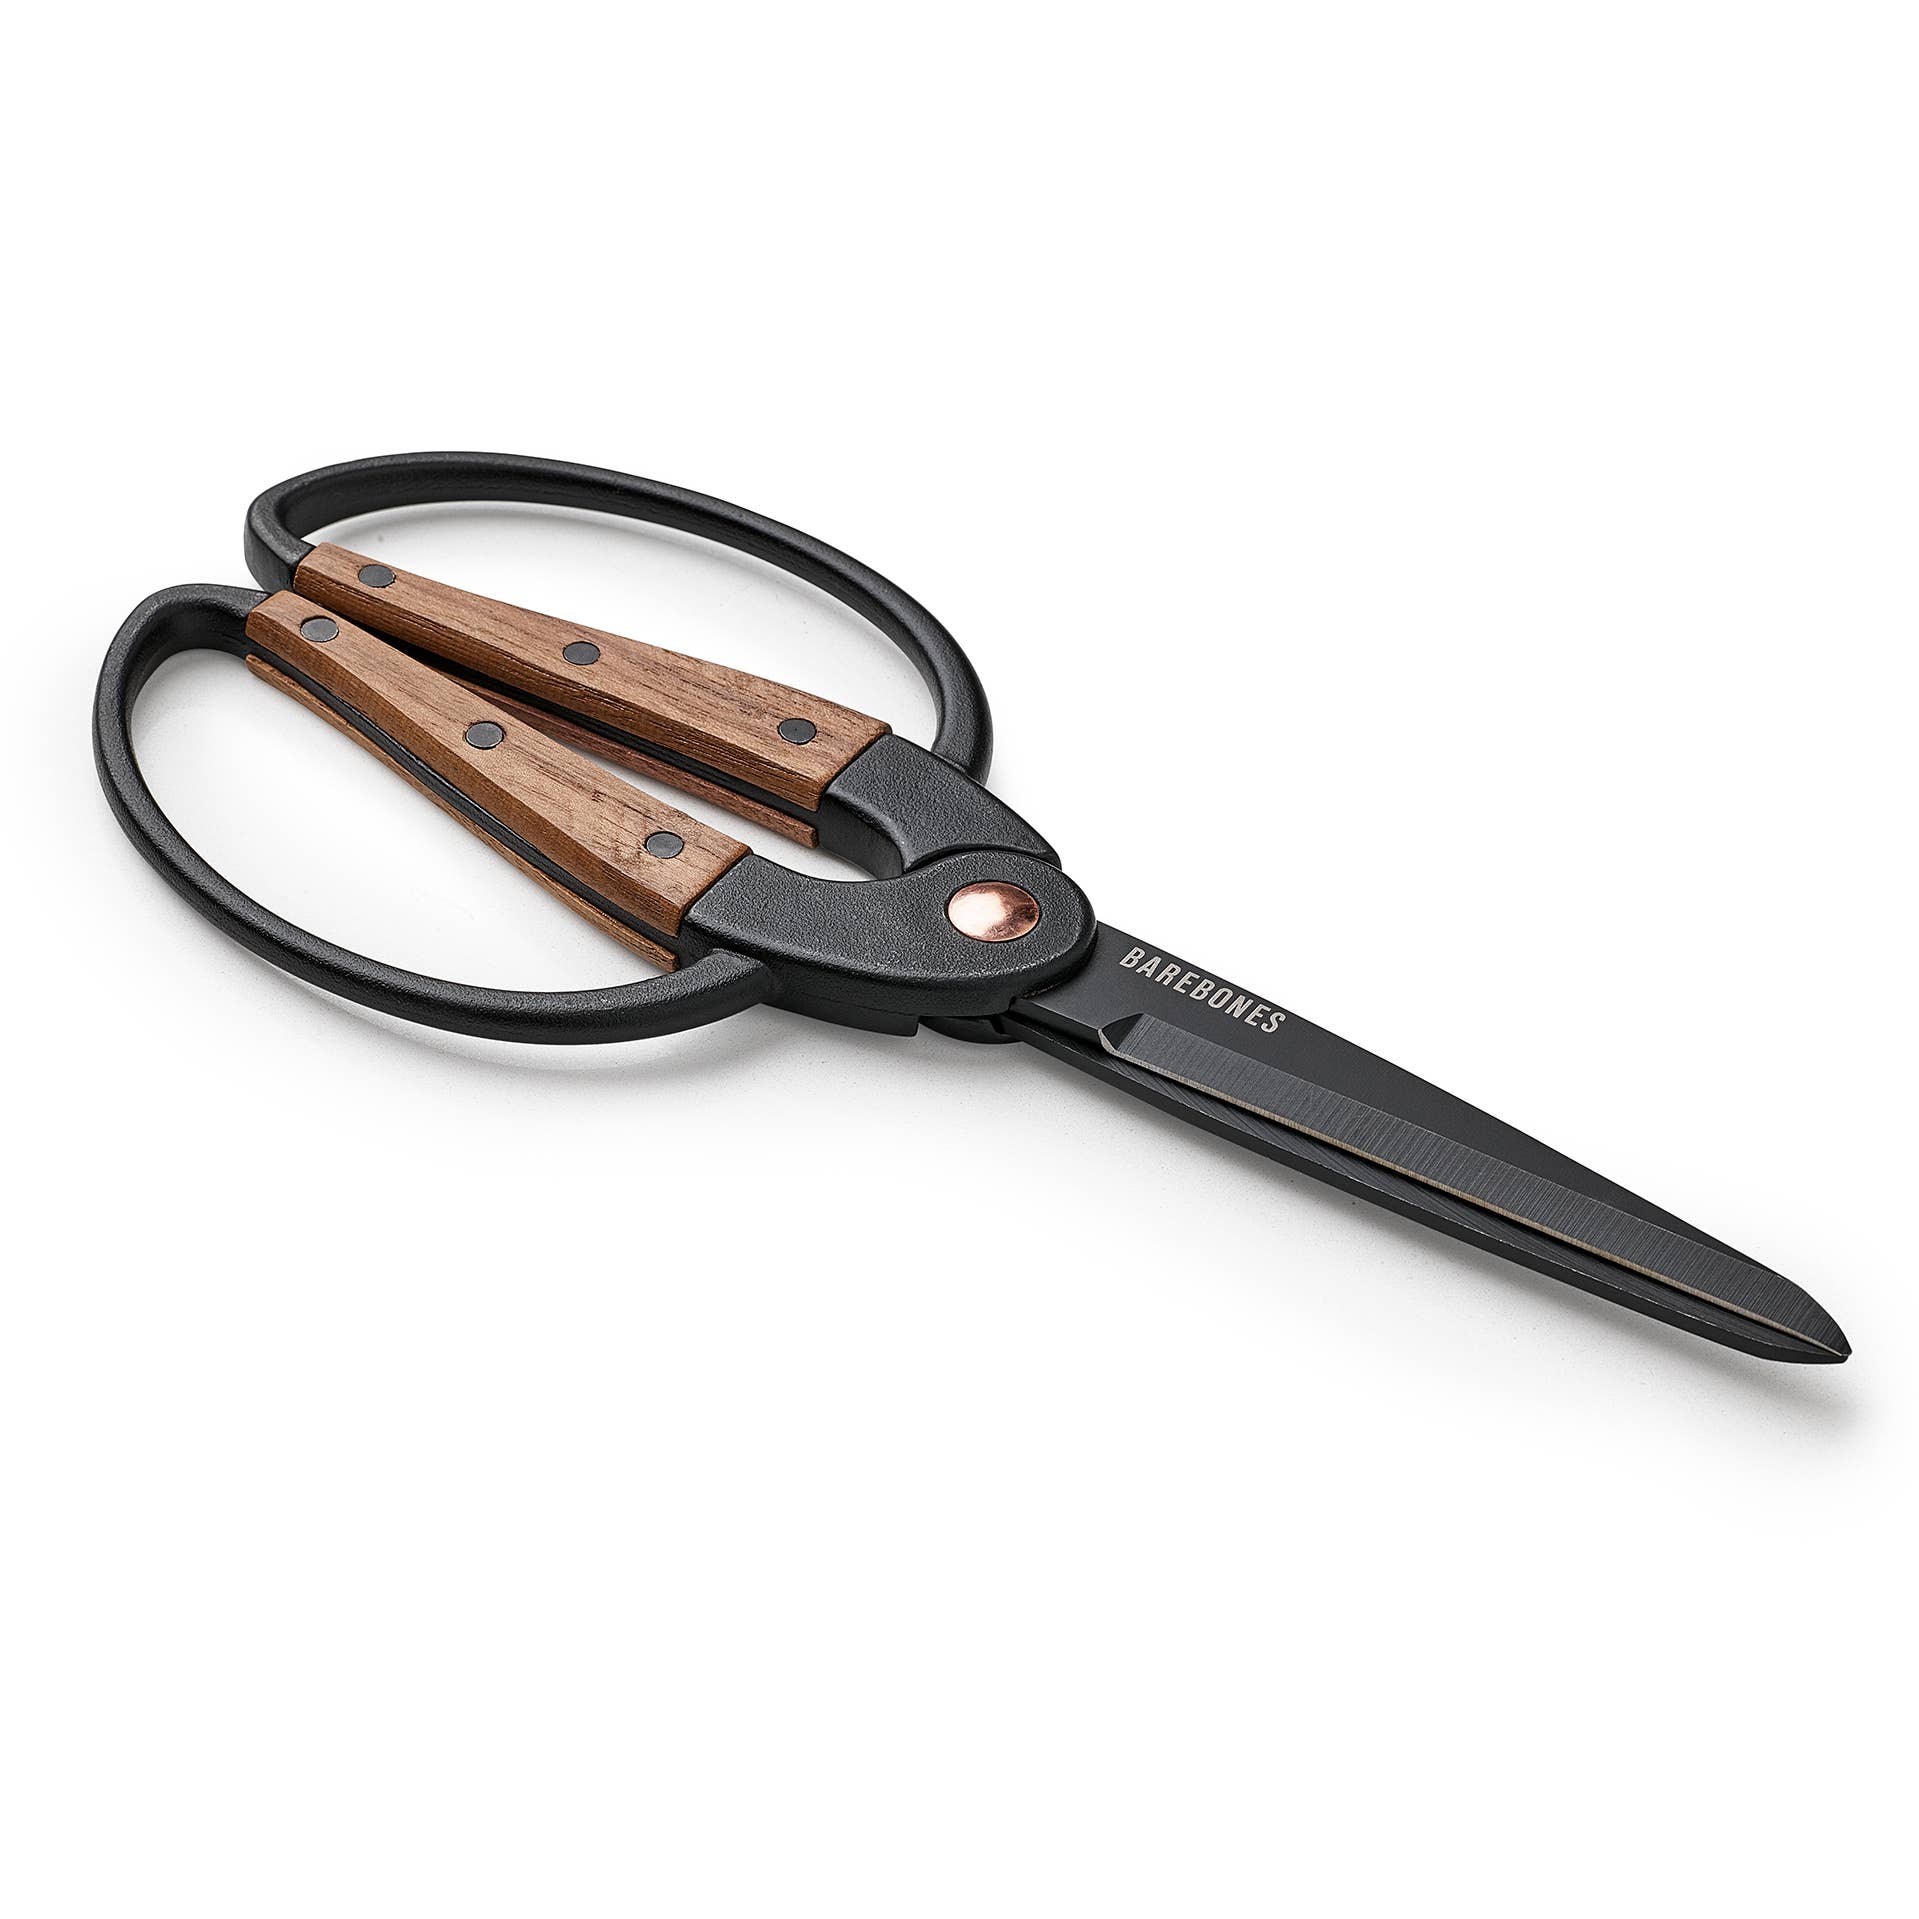 Garden Shears - Large - The Crowd Went Wild